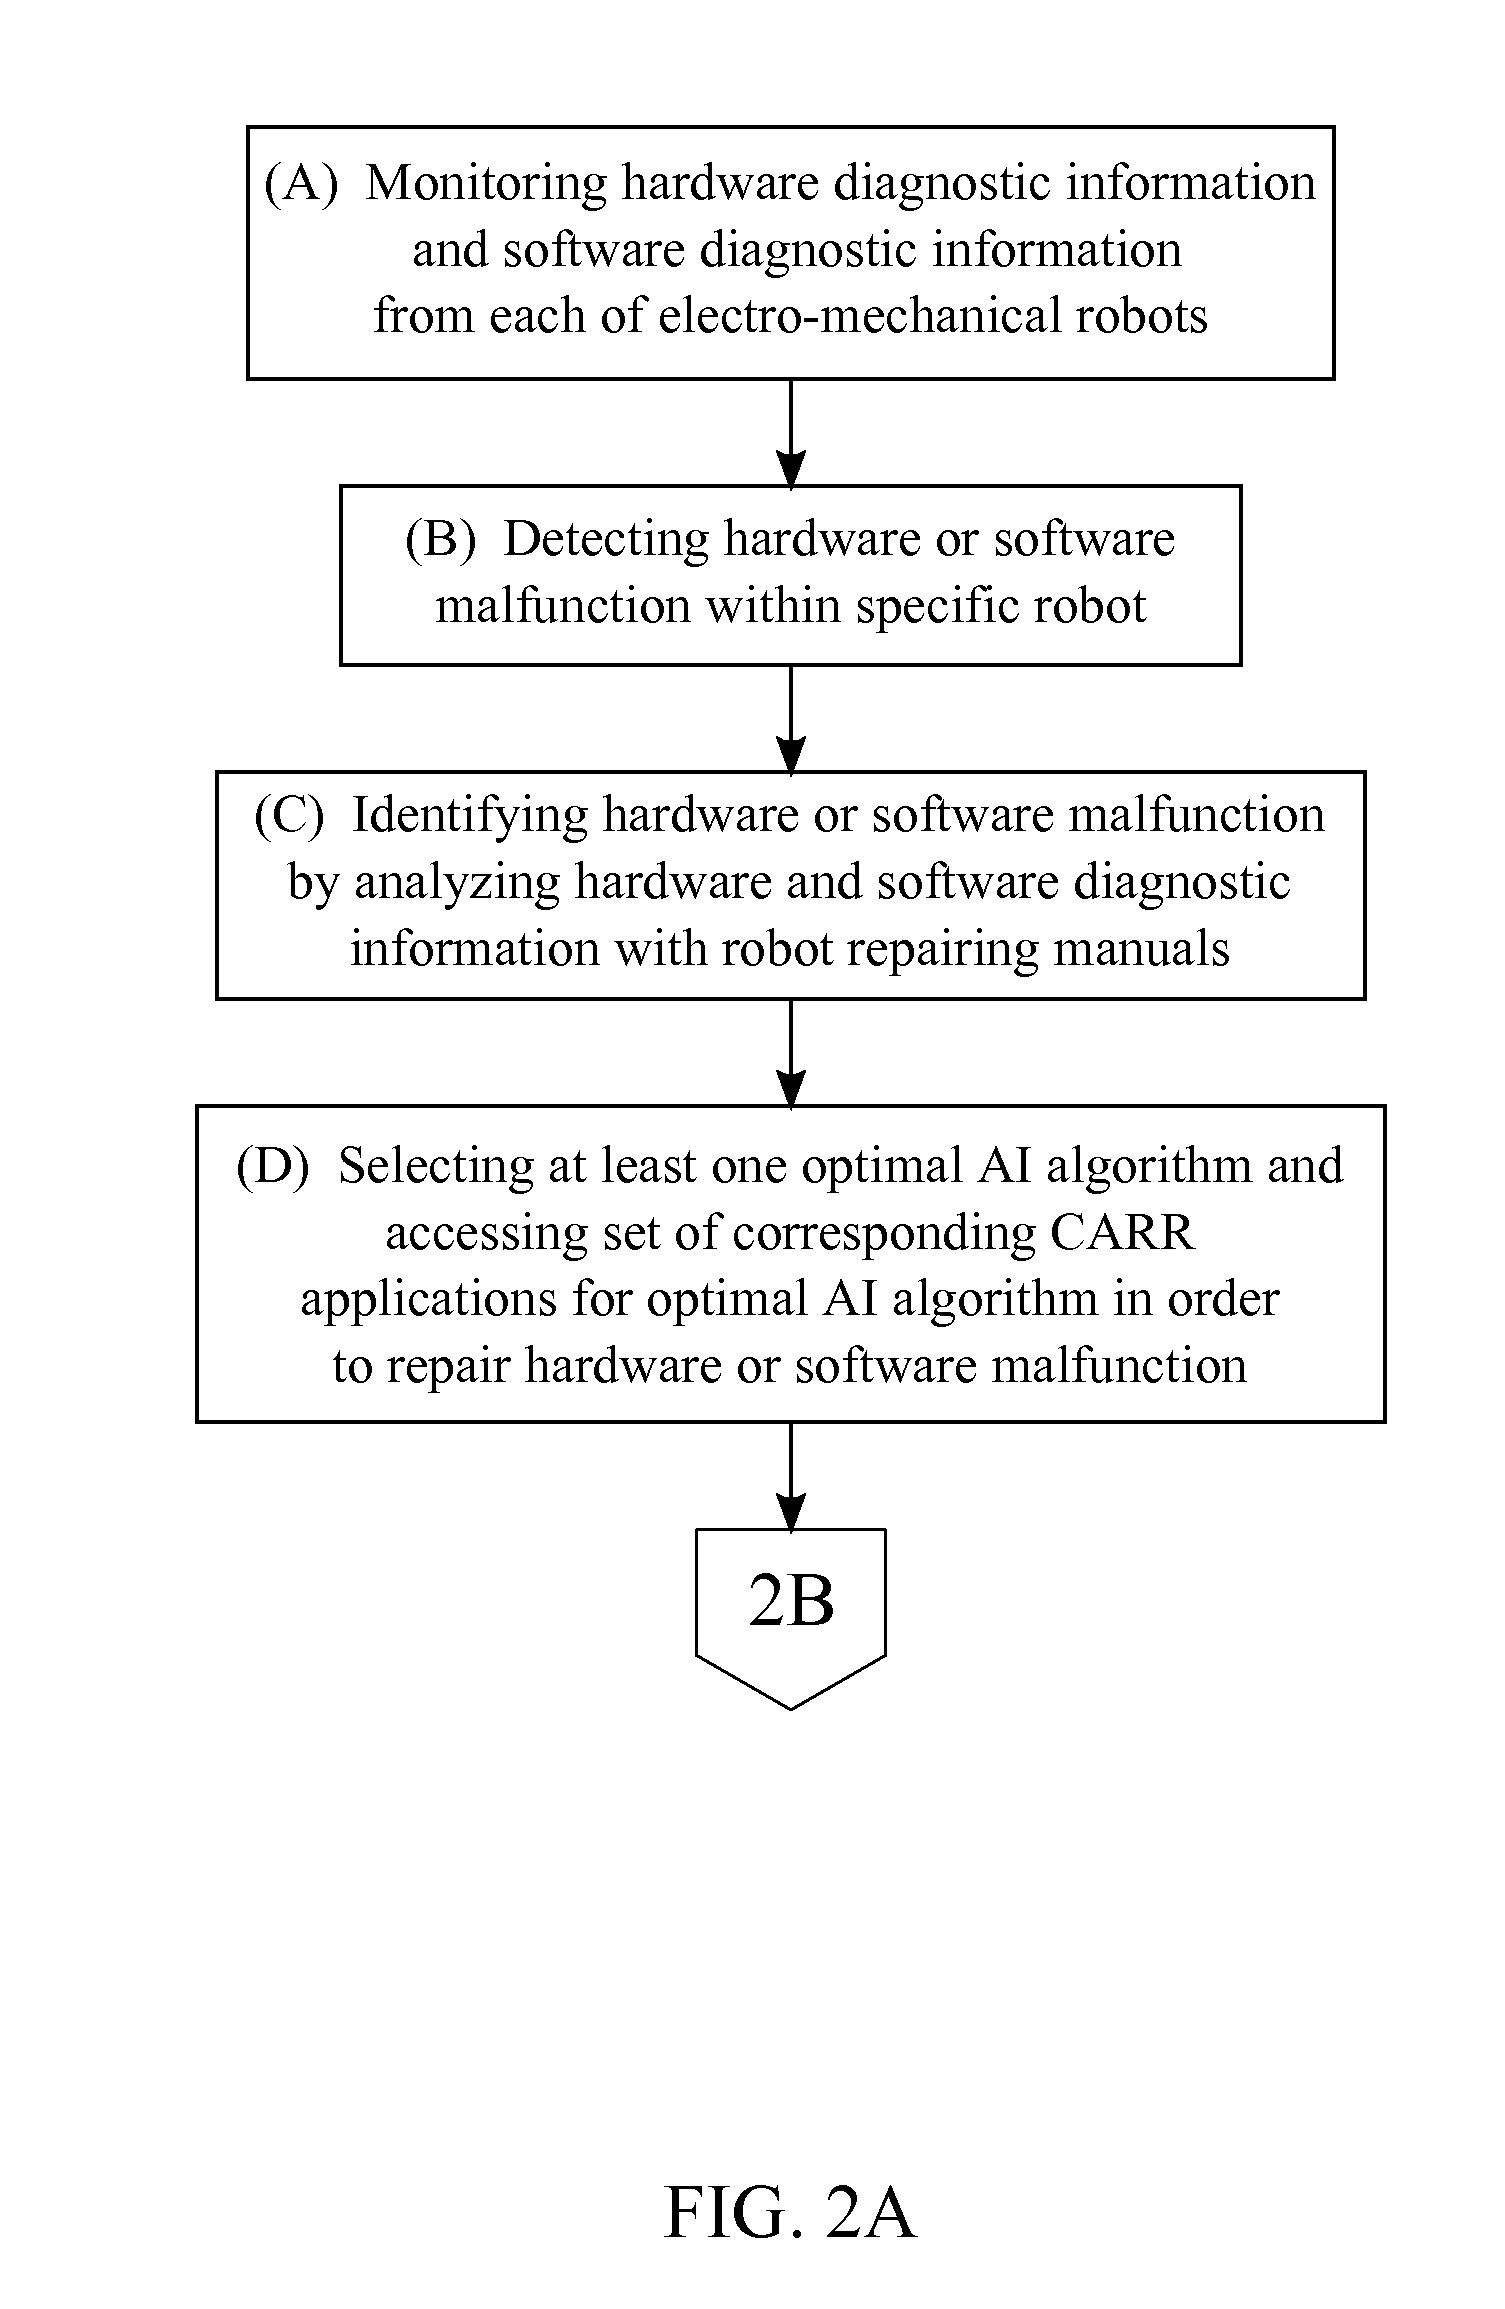 Software Application for Managing a Collection of Robot Repairing Resources for a Technician